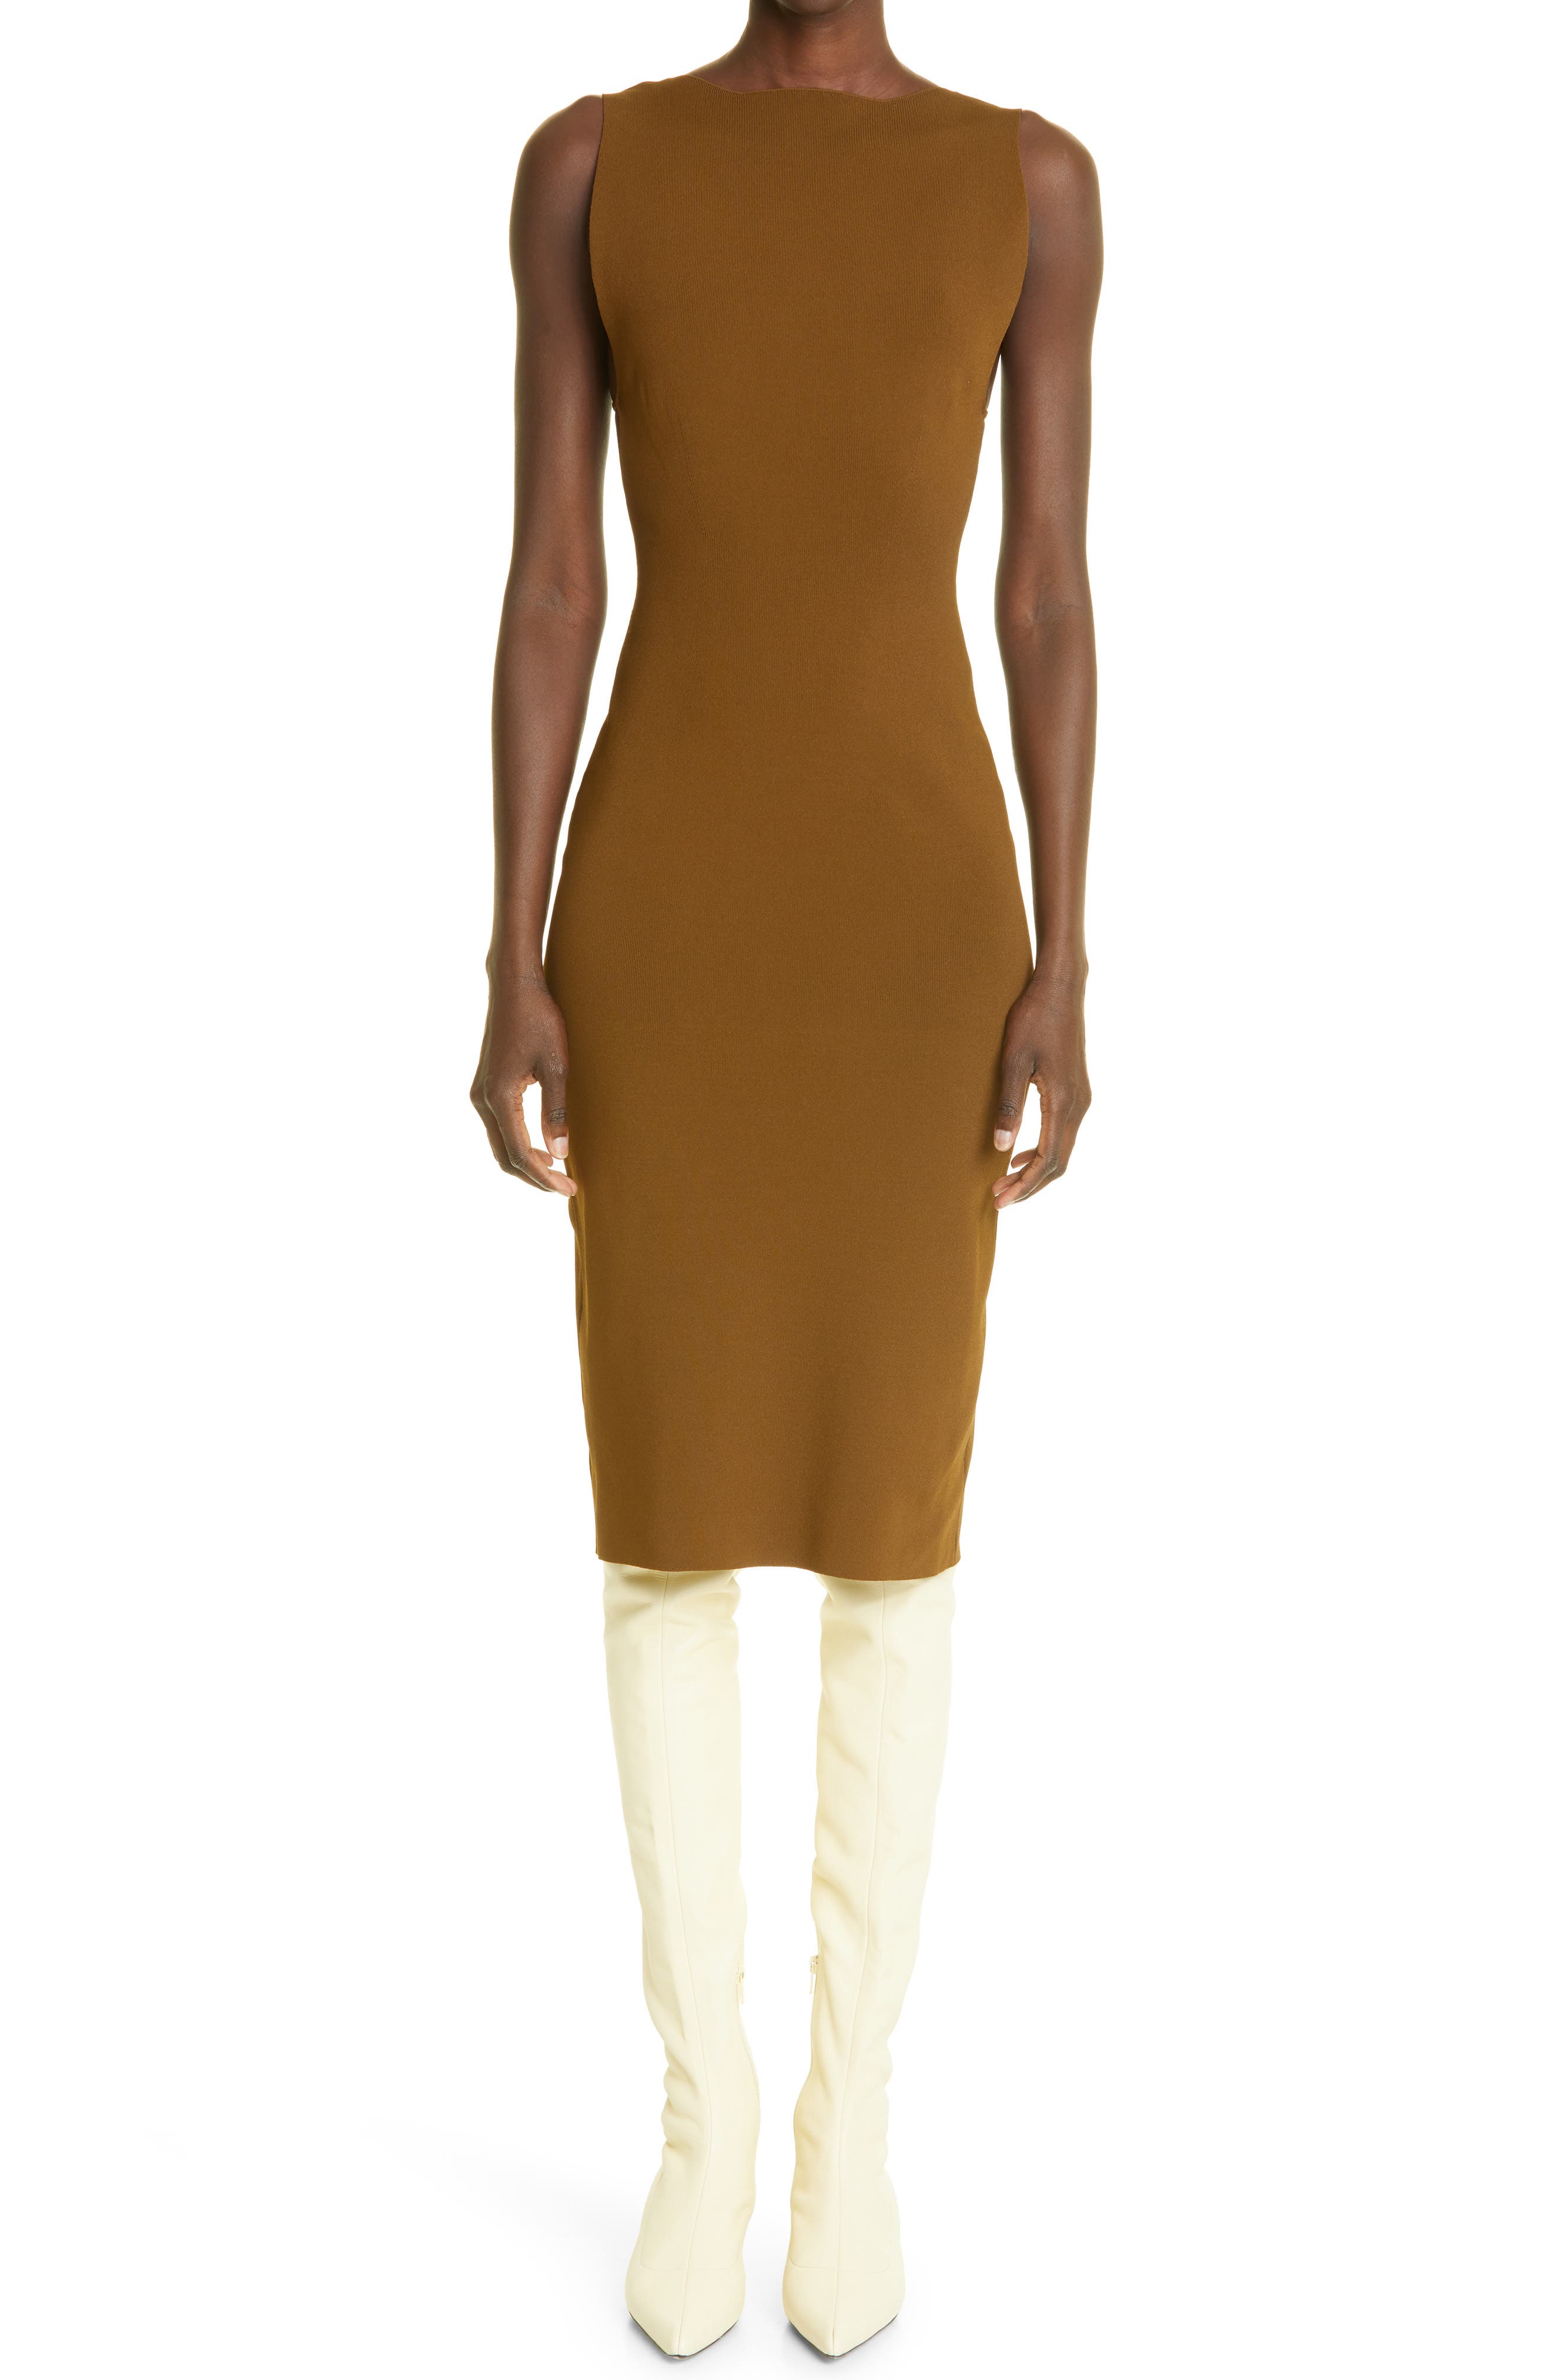 Khaite Sofie Sheath Dress in Absinthe at Nordstrom, Size Small